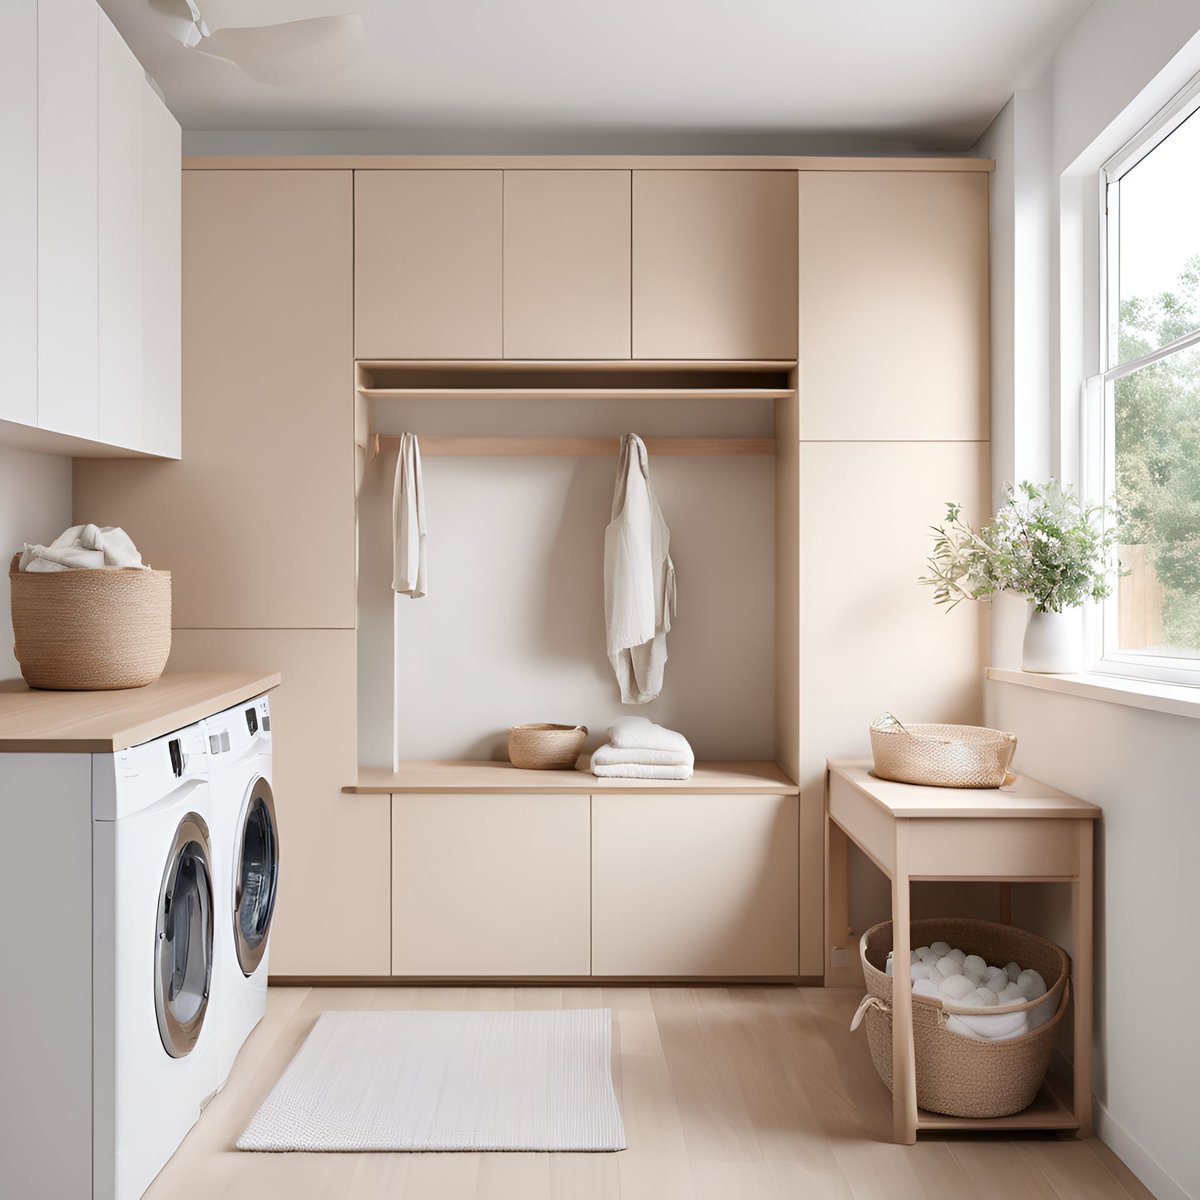 🏠 Tired of a mundane laundry room? Discover our Scandinavian-inspired makeover on ai4spaces.com 🌿🌀 

#LaundryRoomInspiration #ScandiStyle #AI4Spaces #HomeDesign #ModernLaundryRoom #AIHomeDesign #ScandinavianInteriors #MinimalistHome #EfficientDesign #HomeOrganization